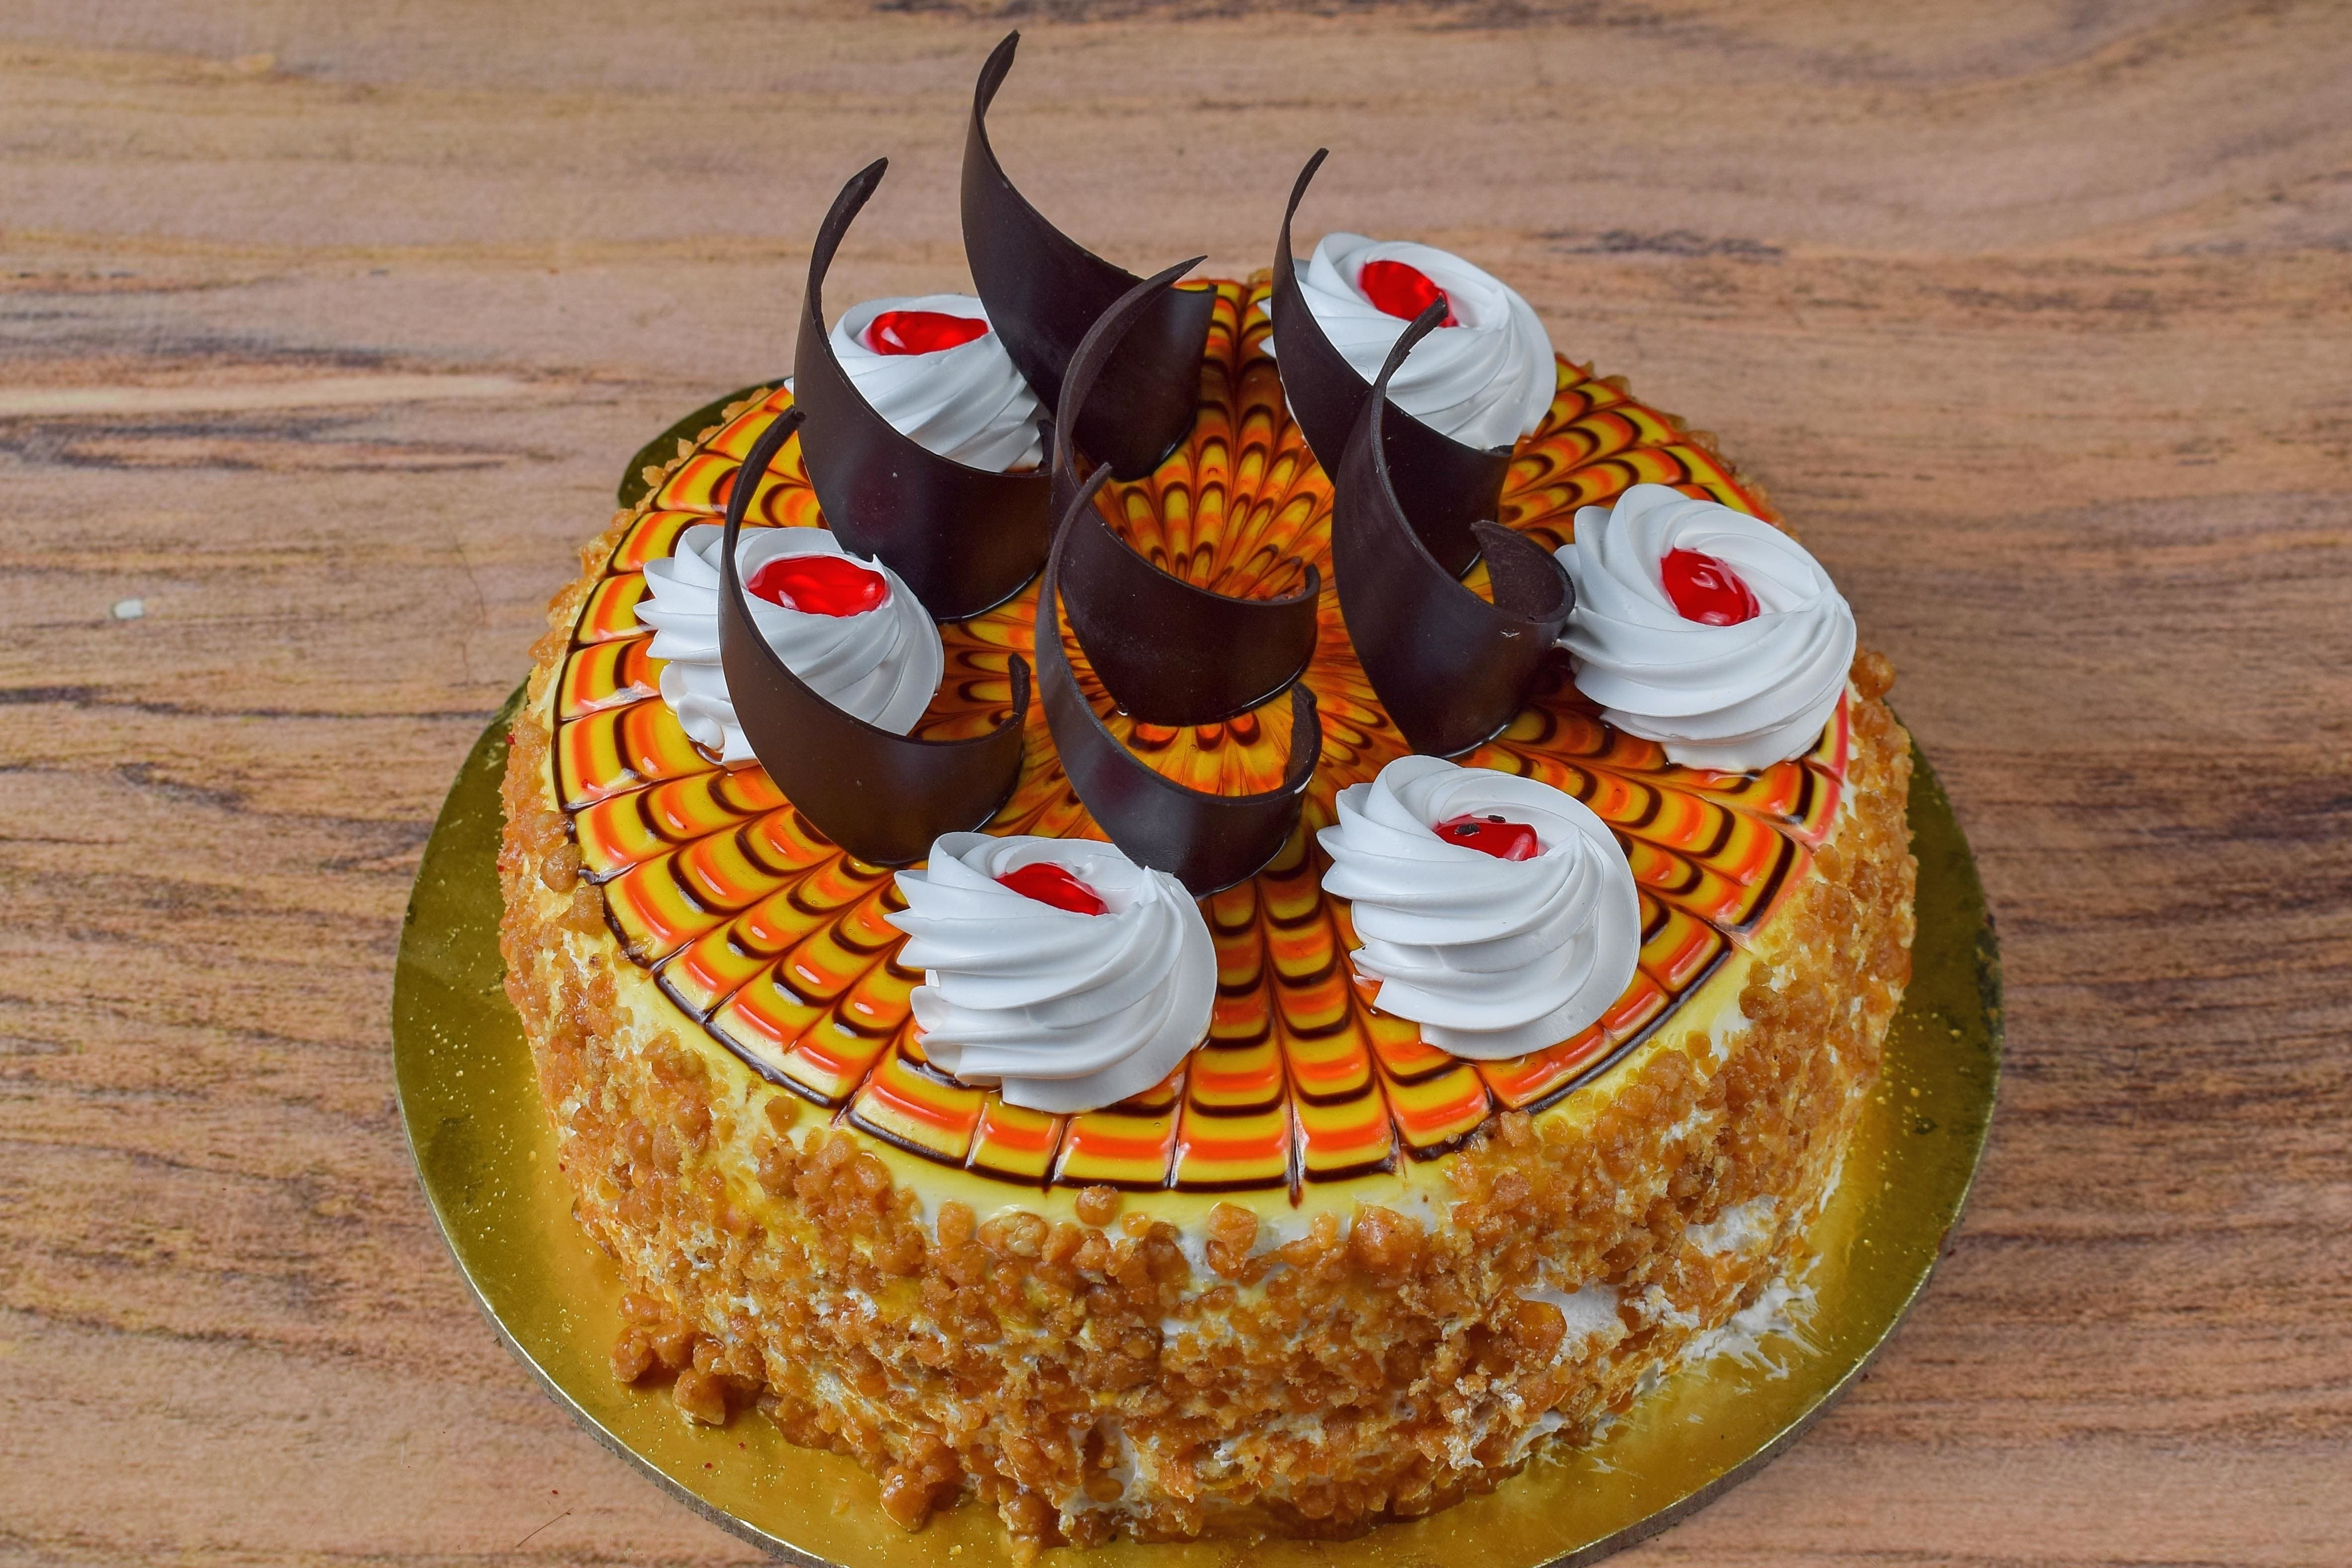 Bee Kay Confectioners, Sector 37, Chandigarh | Zomato